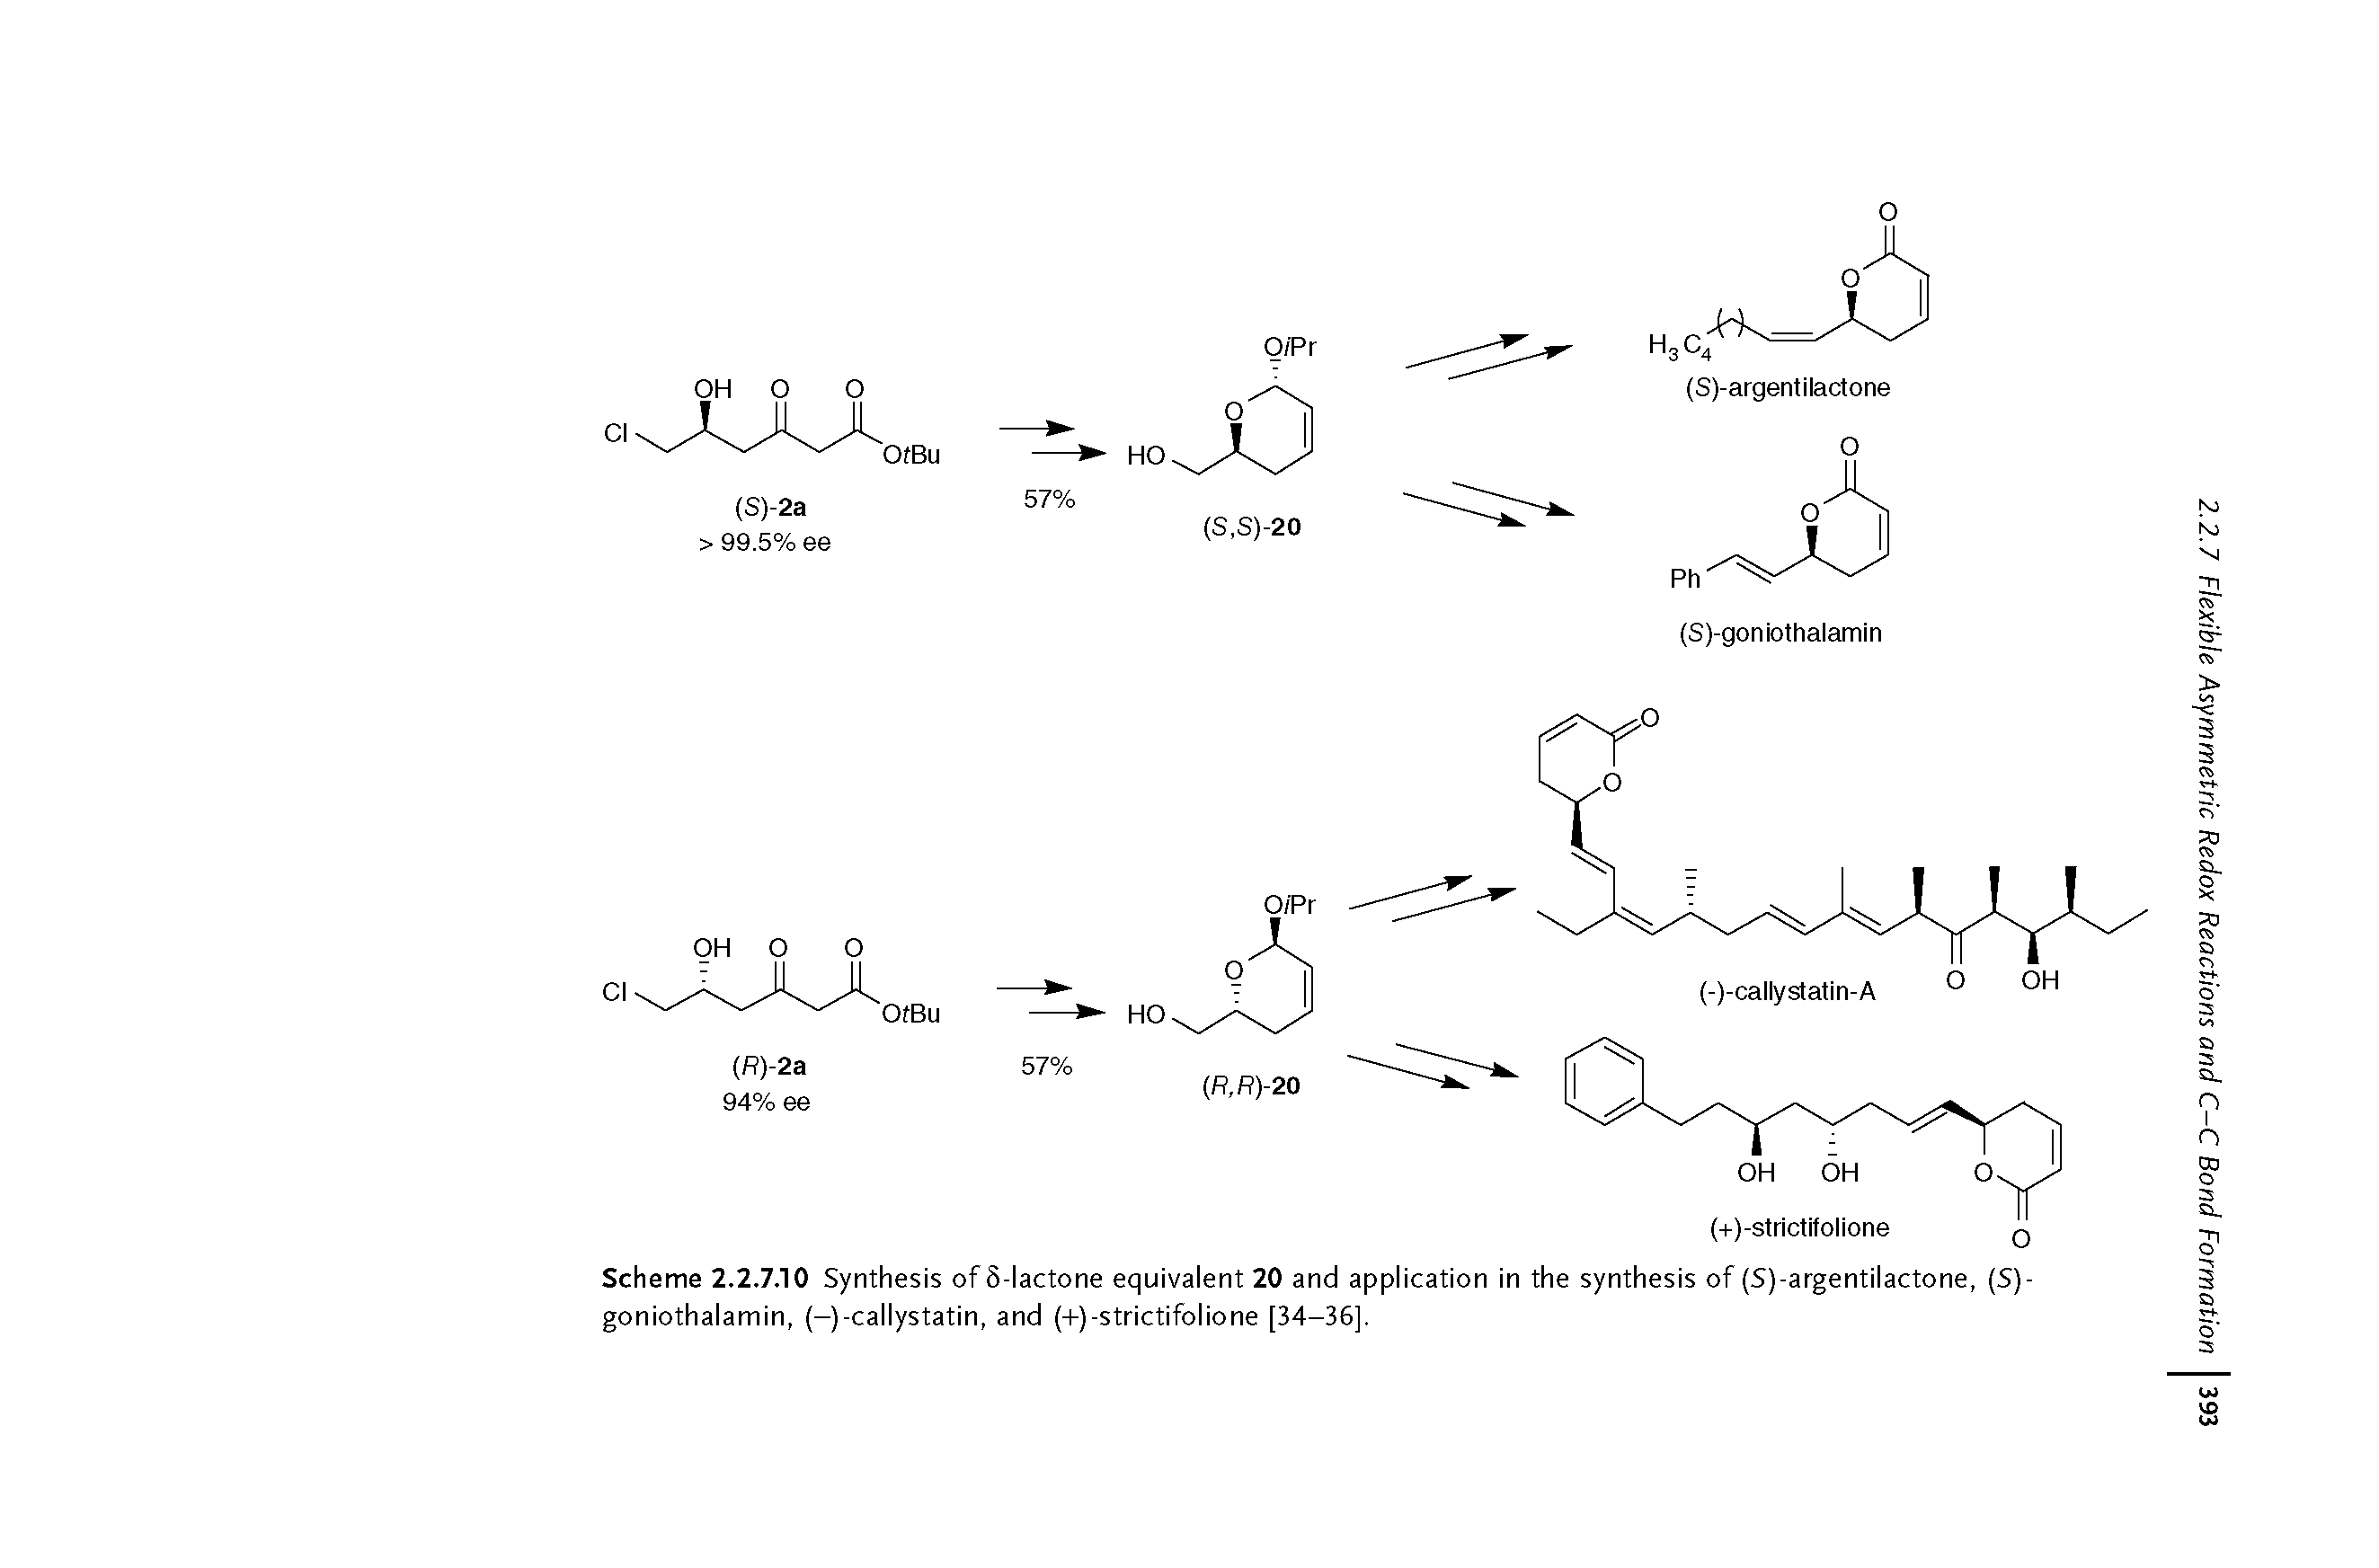 Scheme 2.2.7.10 Synthesis of 5-lactone equivalent 20 and application in the synthesis of (S)-argentilactone, (S)-goniothalamin, (-)-callystatin, and (-t)-strictifolione [34-36],...